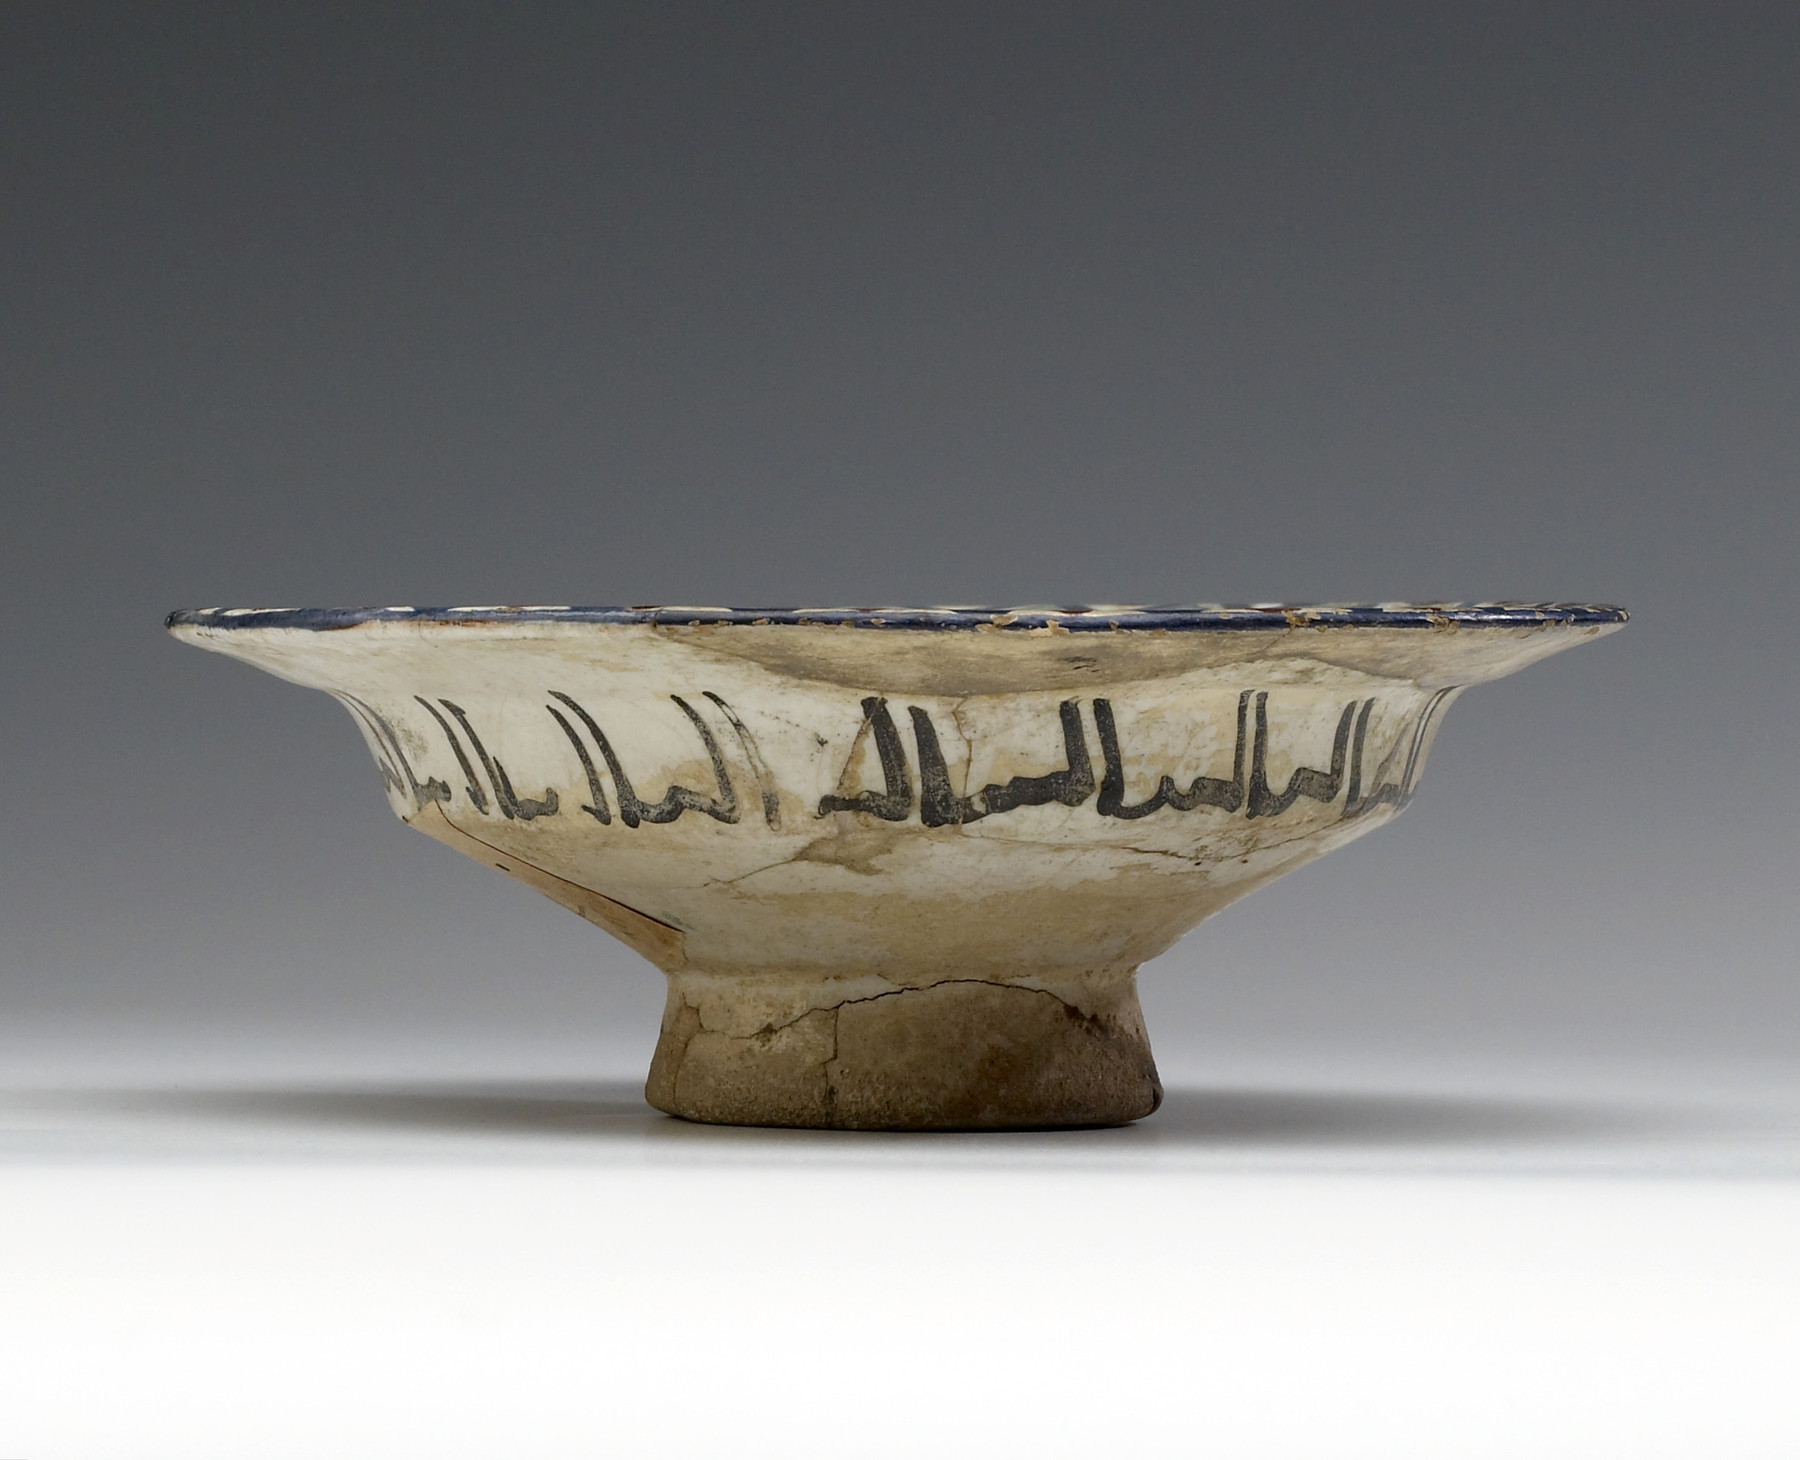 Image for Bowl with Horseman Figure in Center and Diaper Pattern